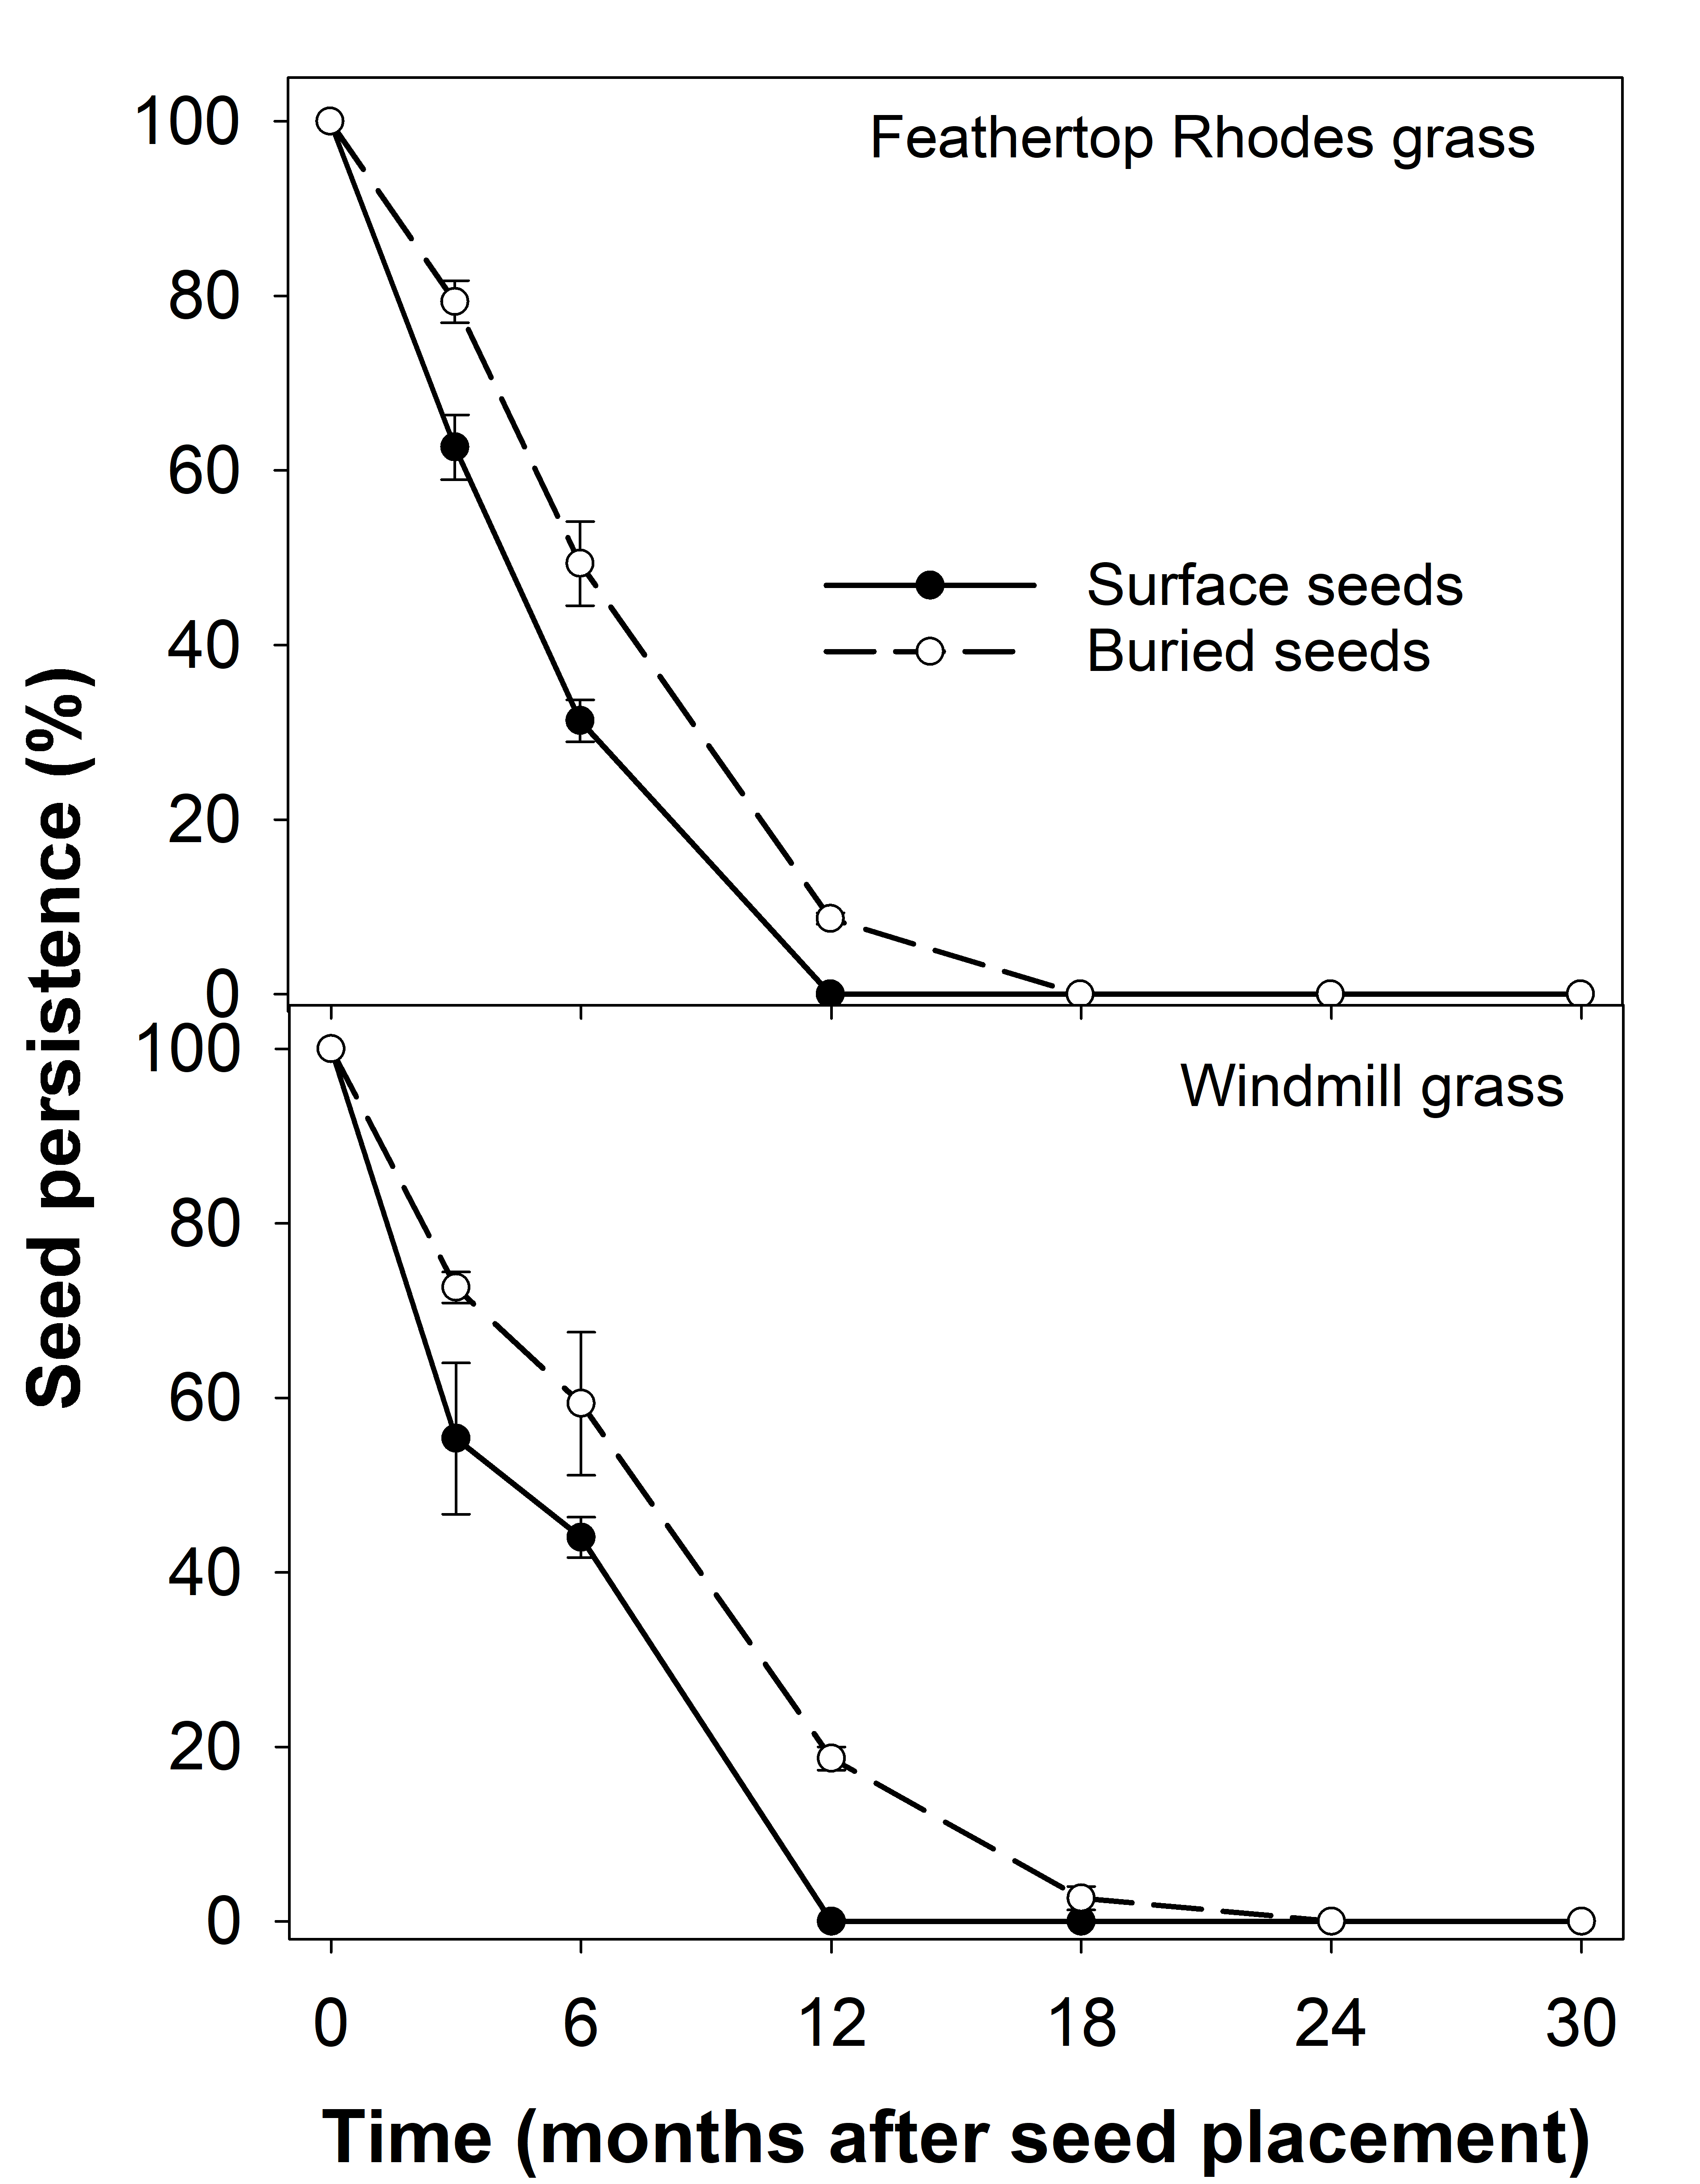 This scatter plot with error bars shows the seed persistence (%) of feathertop Rhodes grass and windmill grass  (Chauhan and Manalil, unpublished data)